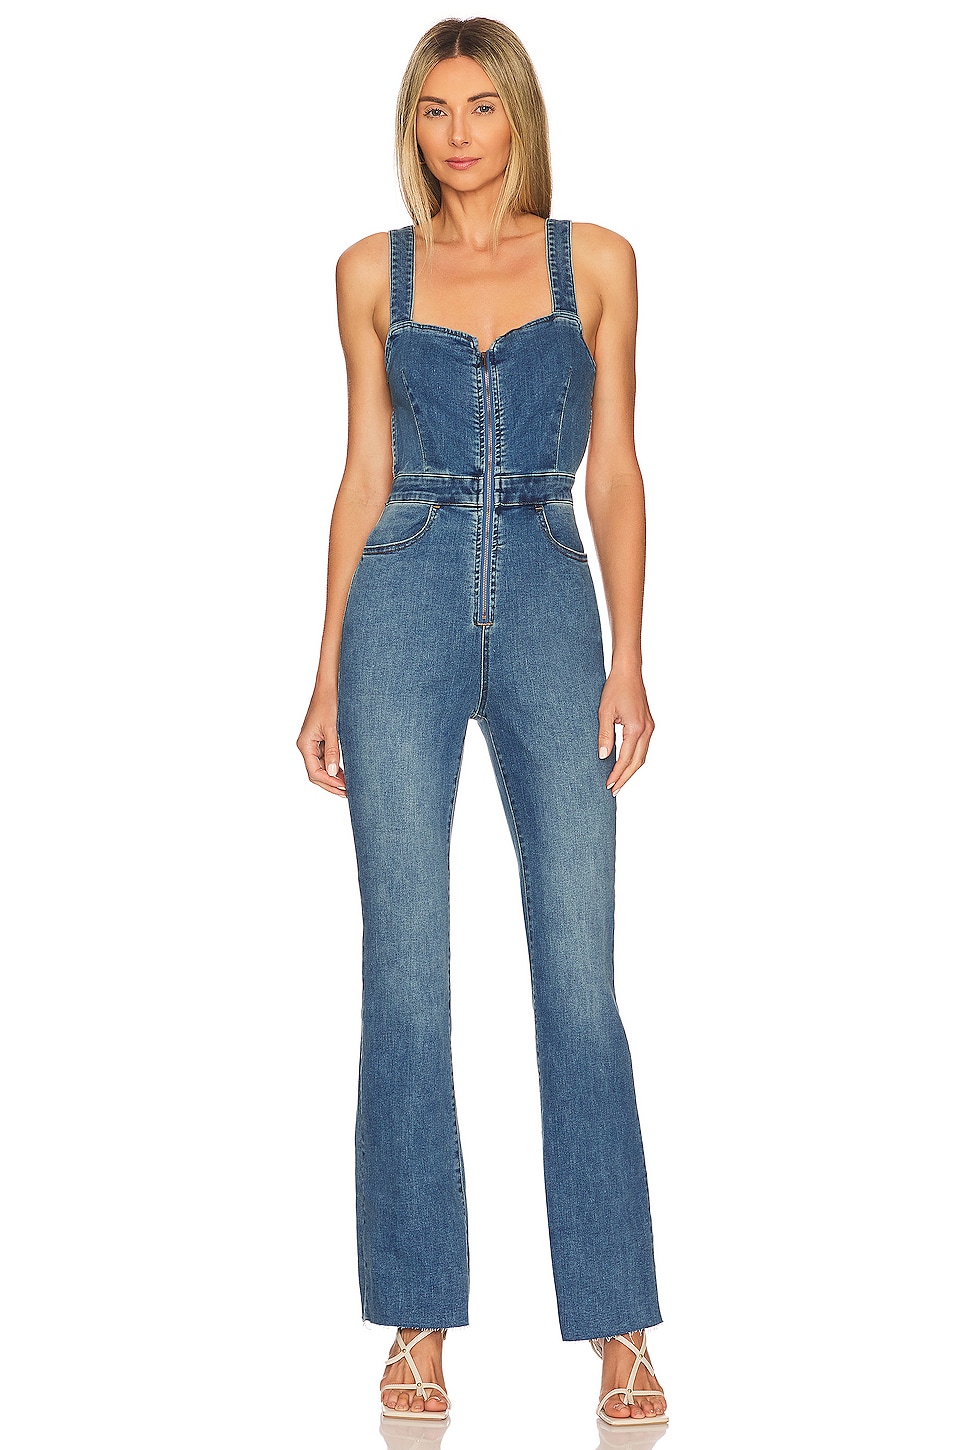 Free People Crvy 2nd Ave One Piece Jumpsuit in Curulean | REVOLVE